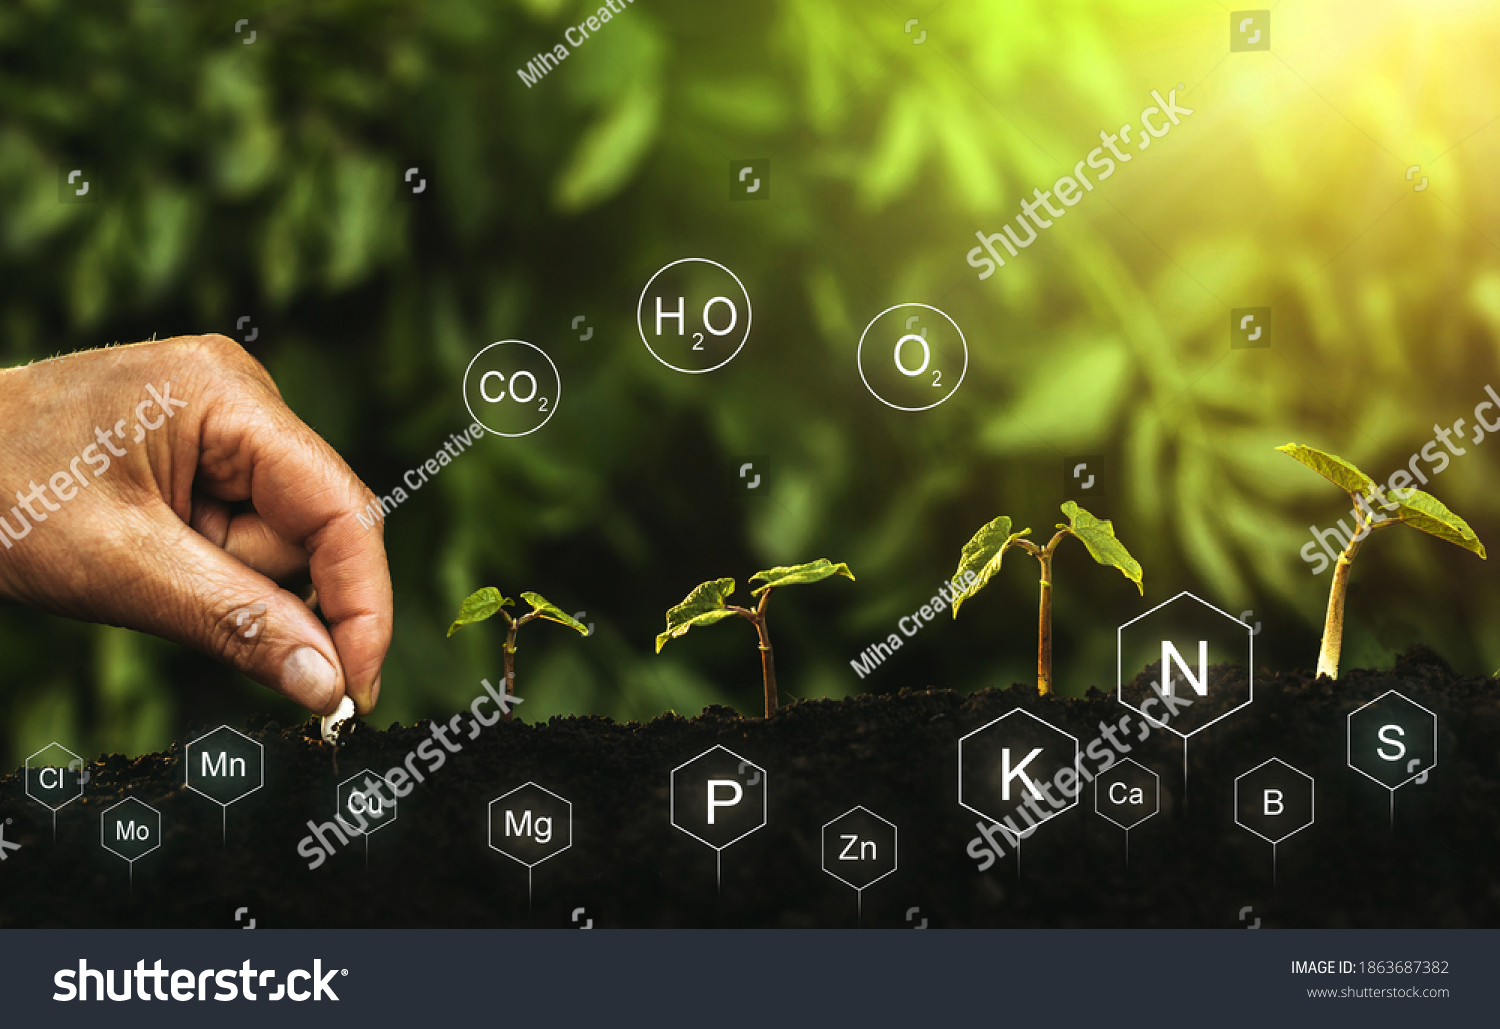 Role of nutrients in plant life. Hands planting seedling. Soil with digital mineral nutrients icon. #1863687382